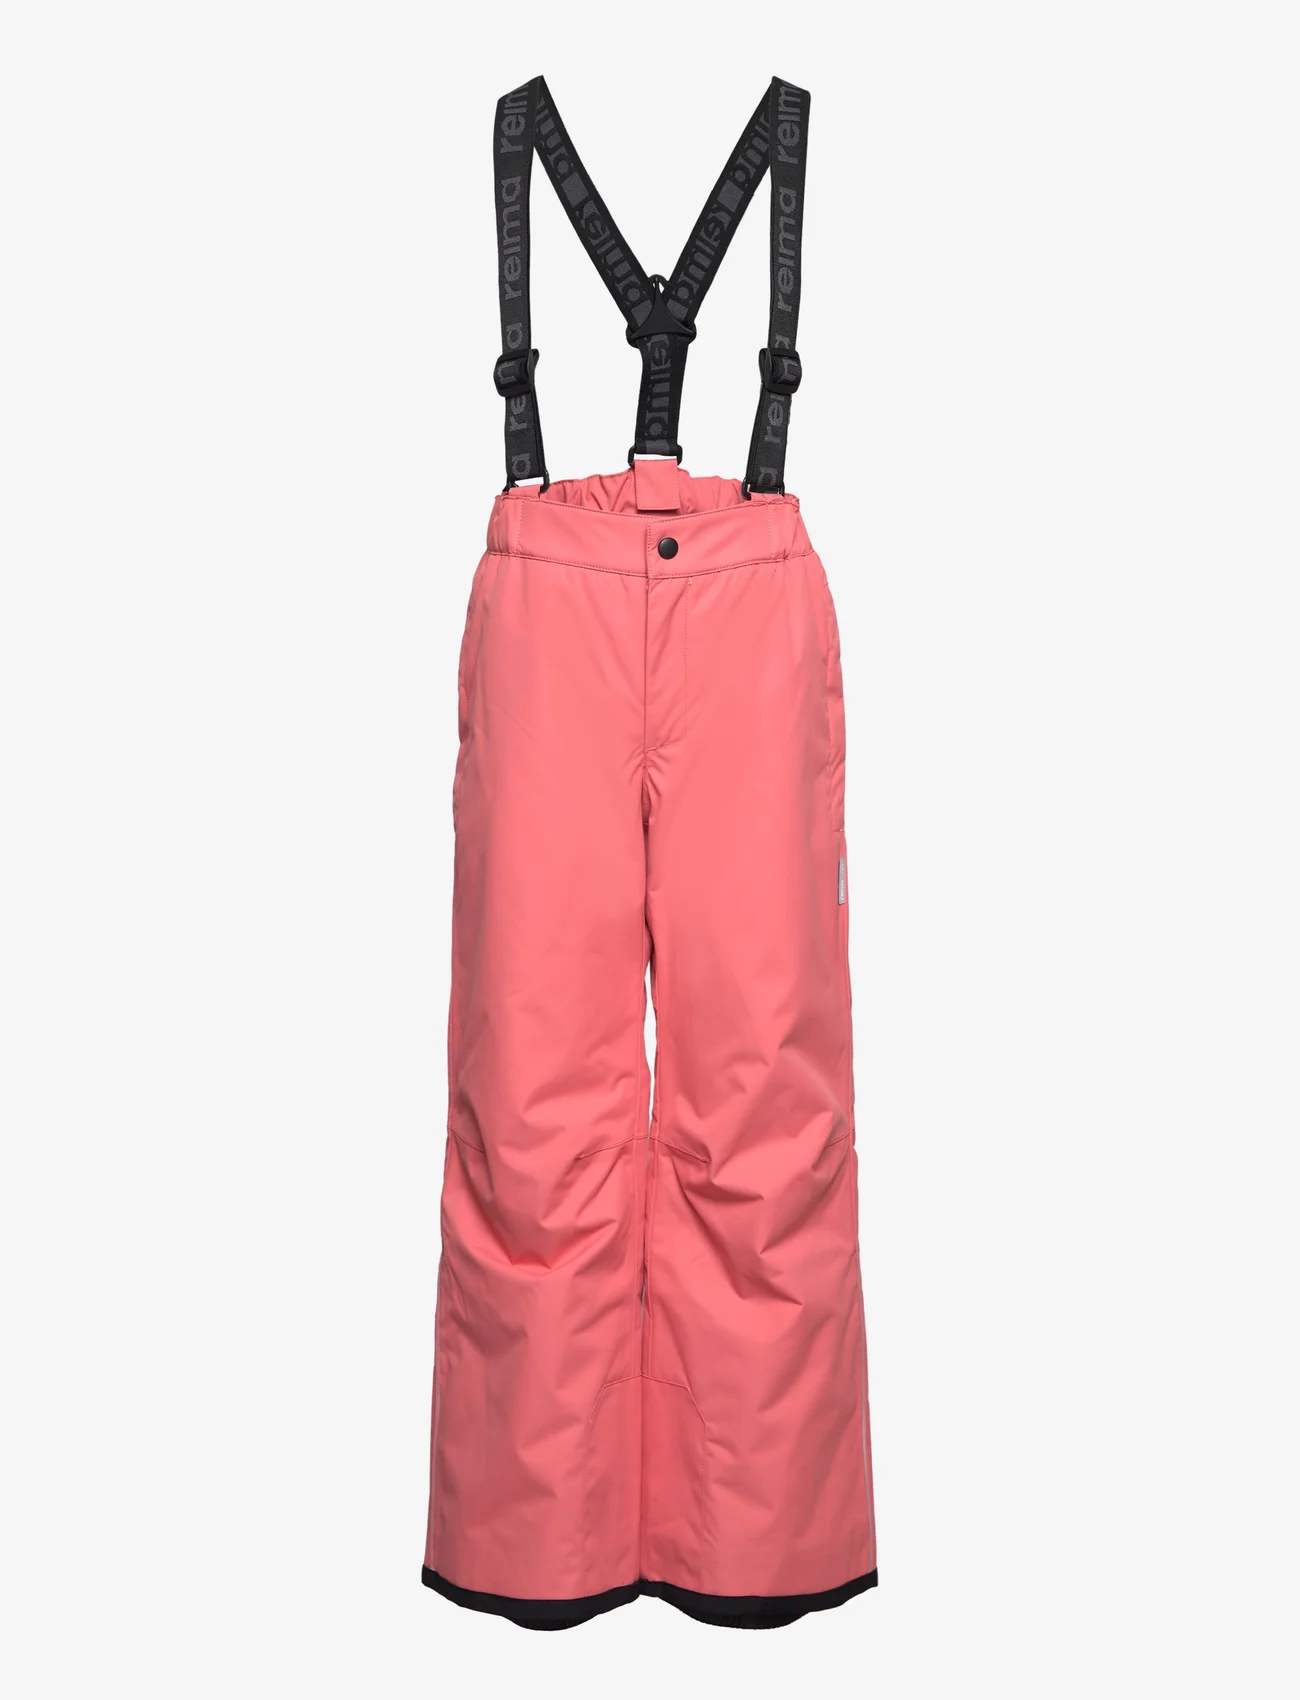 Reima - Kids' winter trousers Proxima - bottoms - pink coral - 0